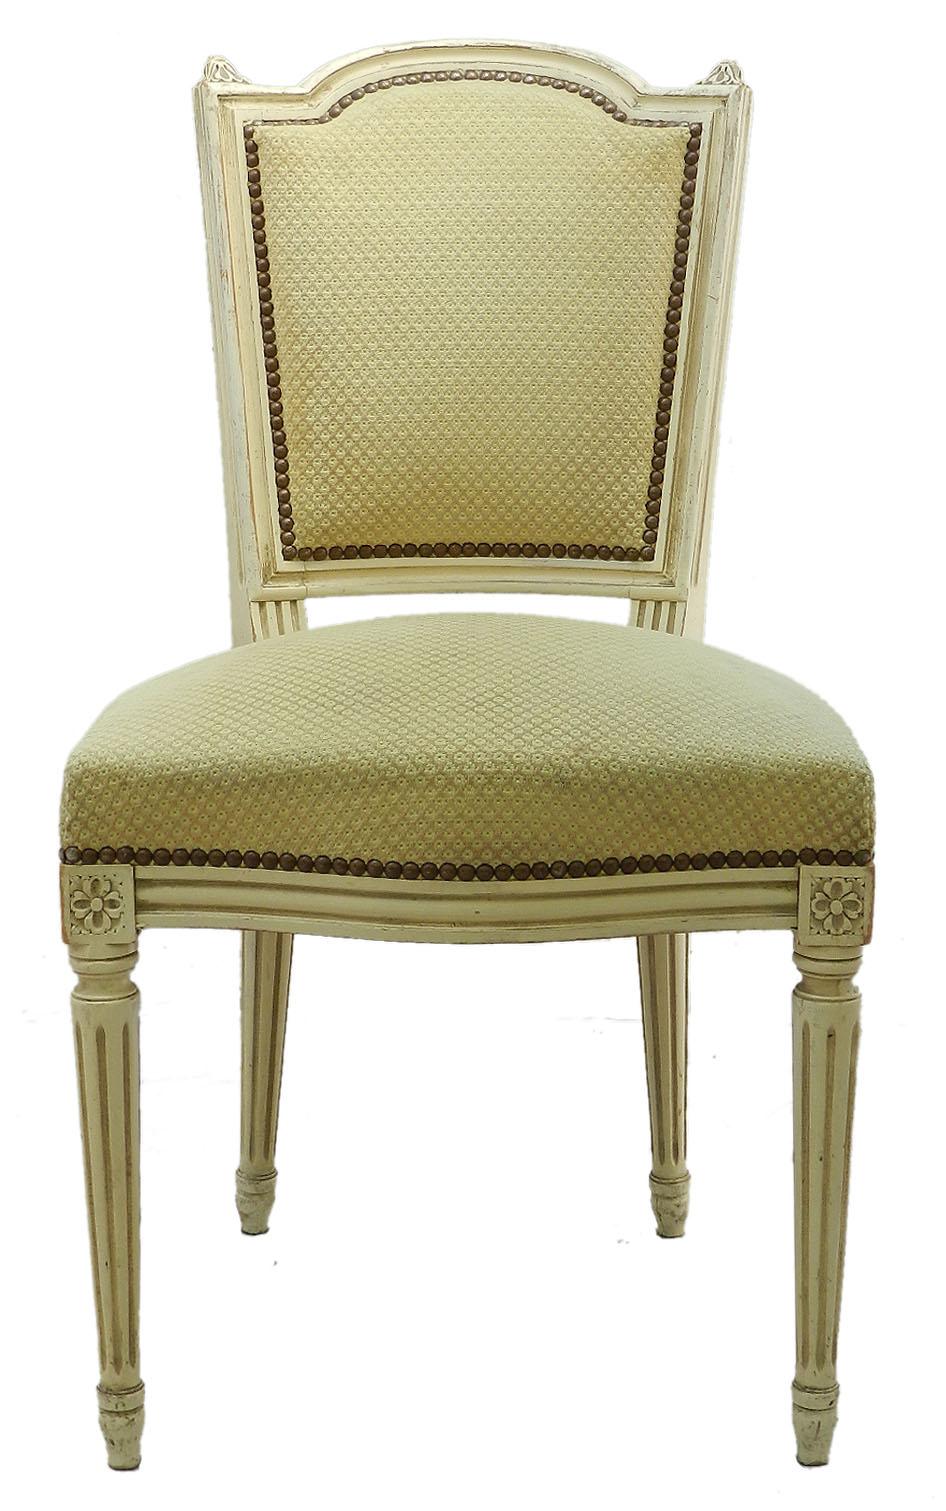 Four French dining chairs circa 1920 Louis XVI revival
Upholstery in good vintage condition
Top covers easily changed to suit your interior
Original paint gloriously distressed through age
Sound and solid
Measure: Seat height